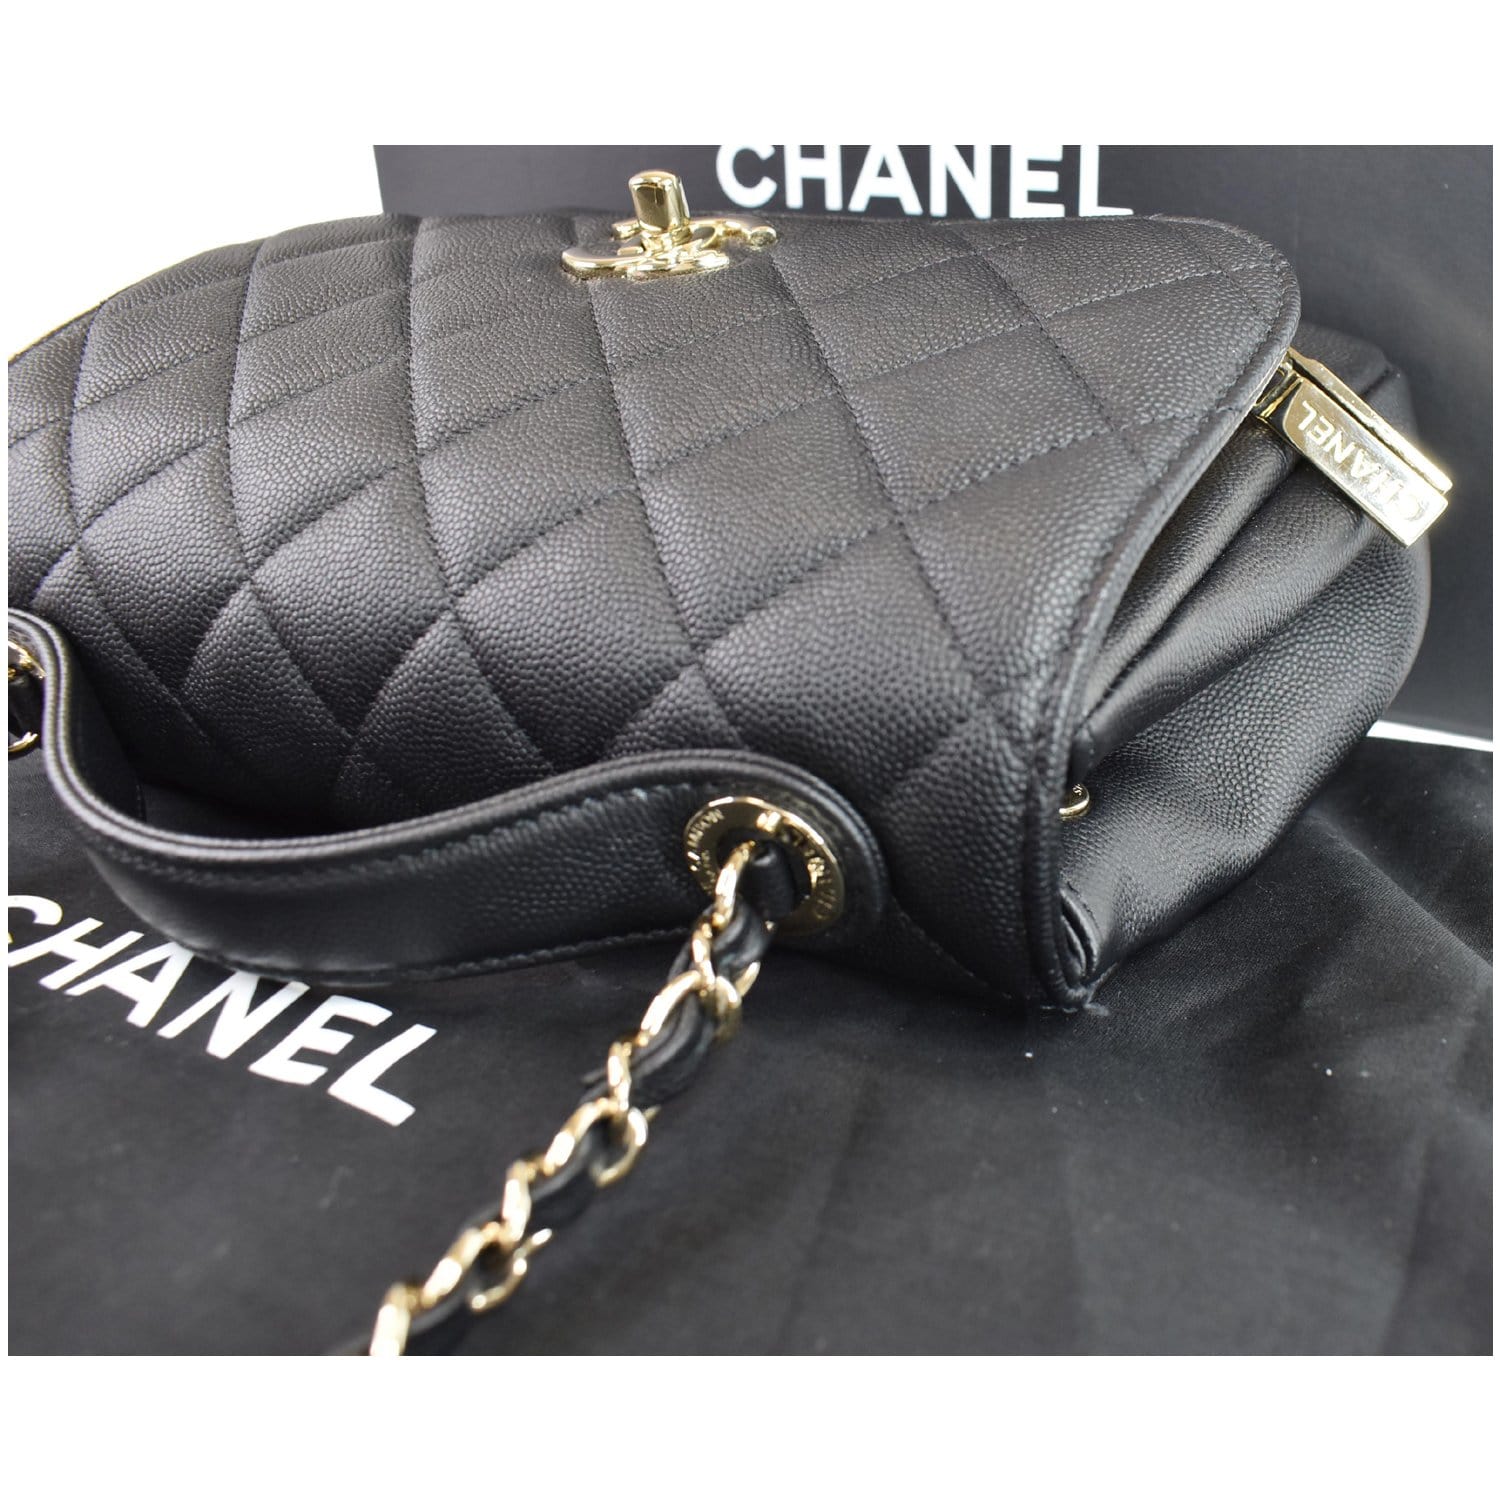 CHANEL Business Affinity Medium Black Caviar with Champagne Hardware 2017